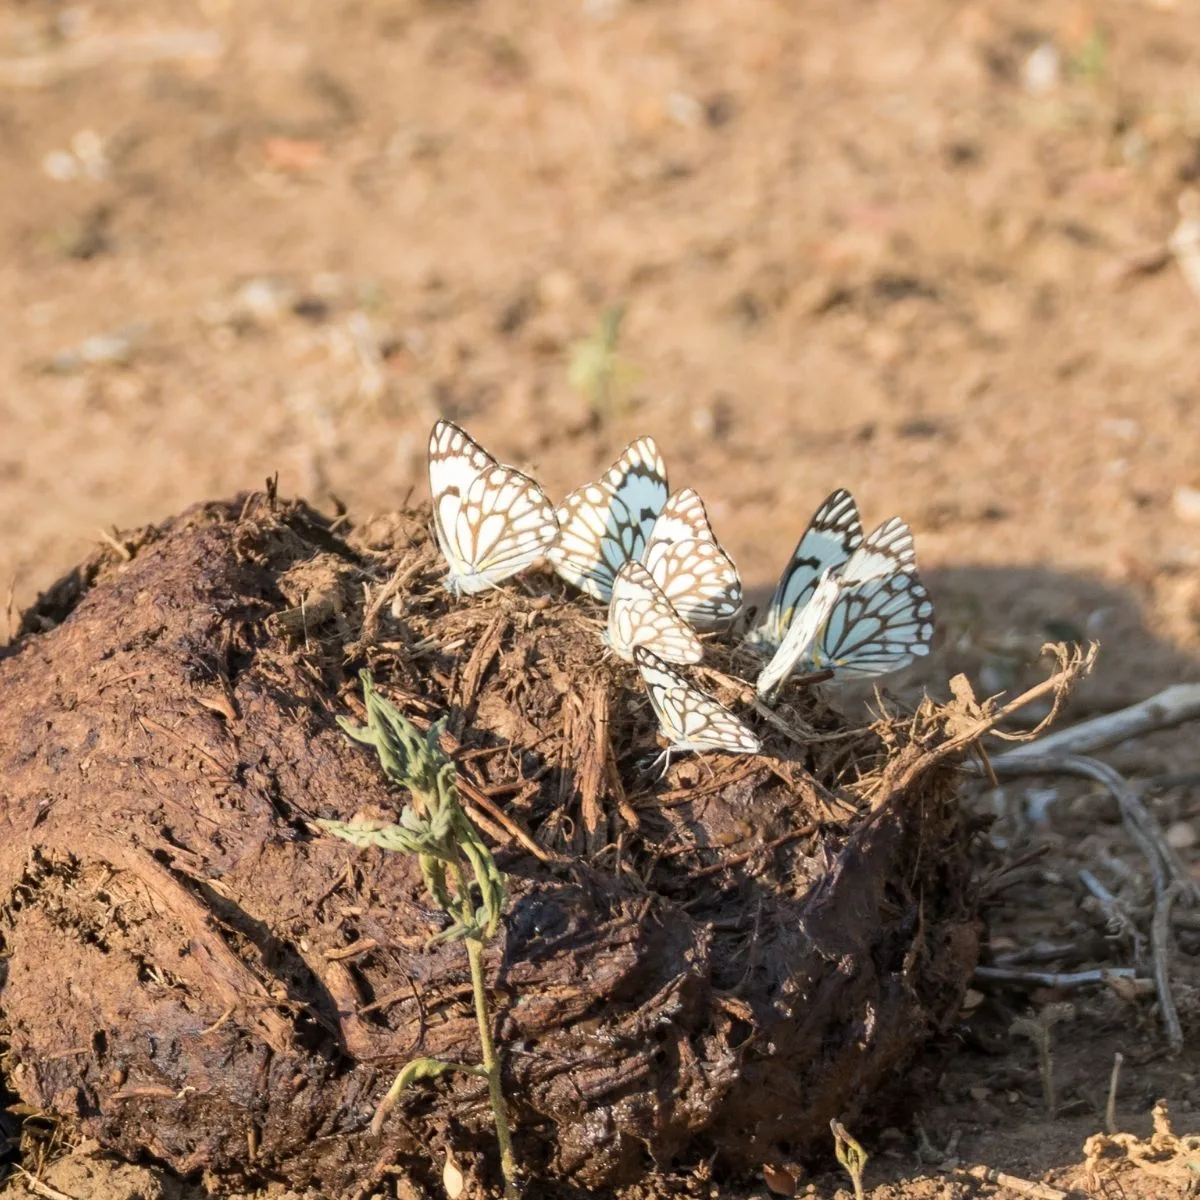 butterflies gathered on a pile of manure